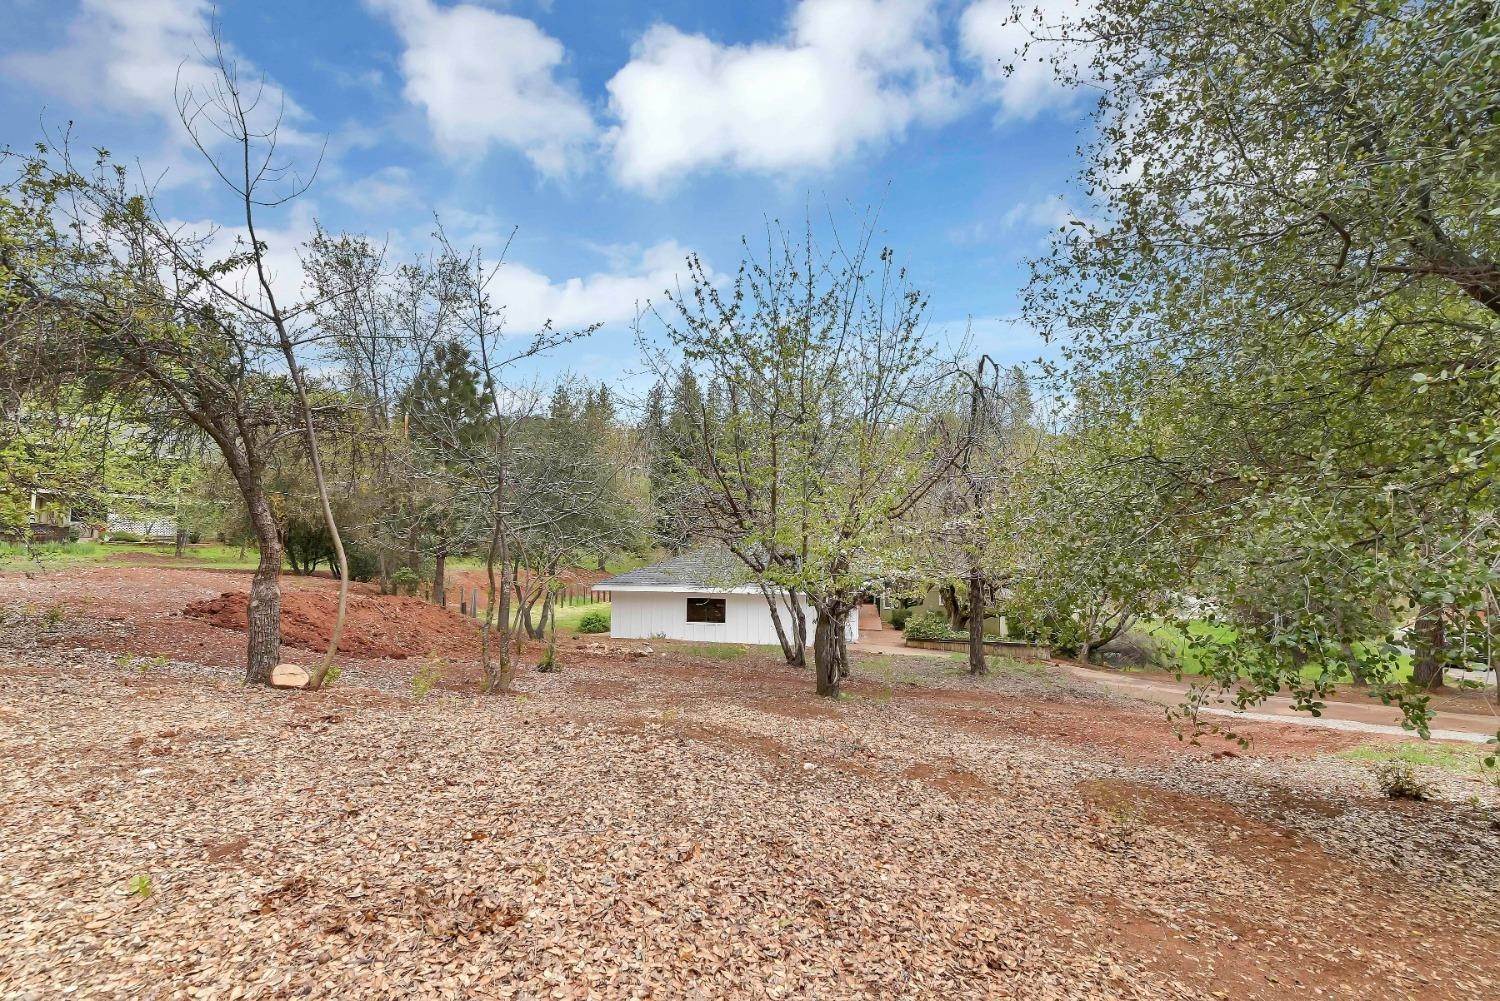 43. Single Family Homes for Active at 126 Apple Blossom Drive Murphys, California 95247 United States